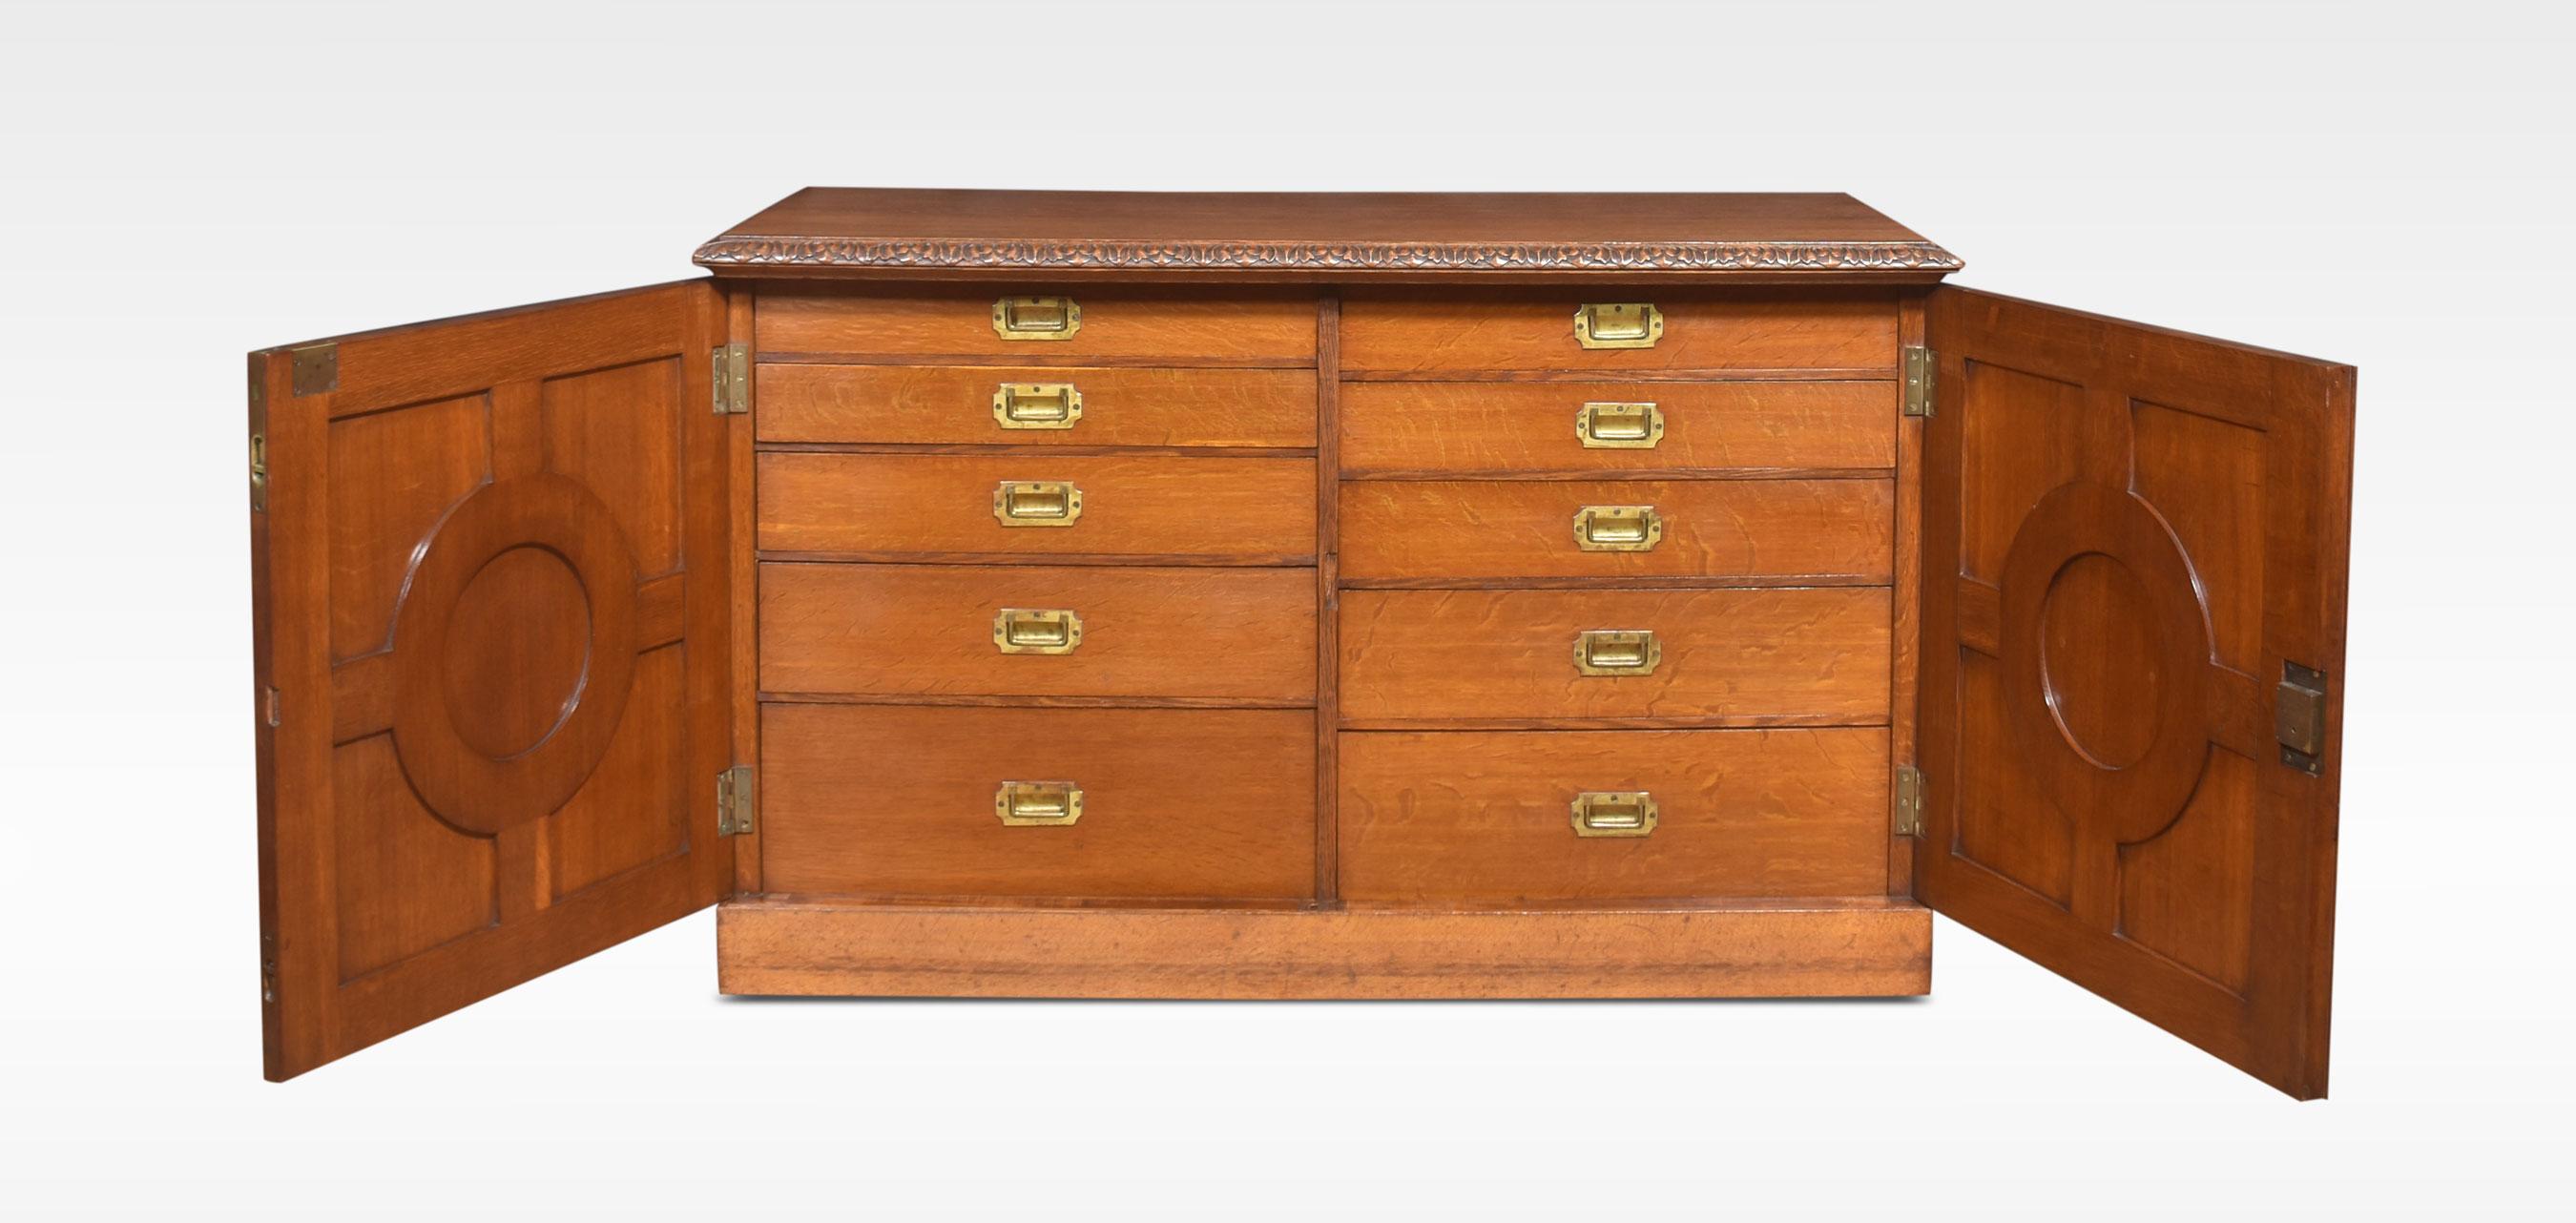 19th-century cabinet, the large rectangular well-figured oak top having a molded edge. Above two finely carved doors with foliated scrolling detail. The door opening to reveal two banks of five graduated drawers with recessed brass handles. All